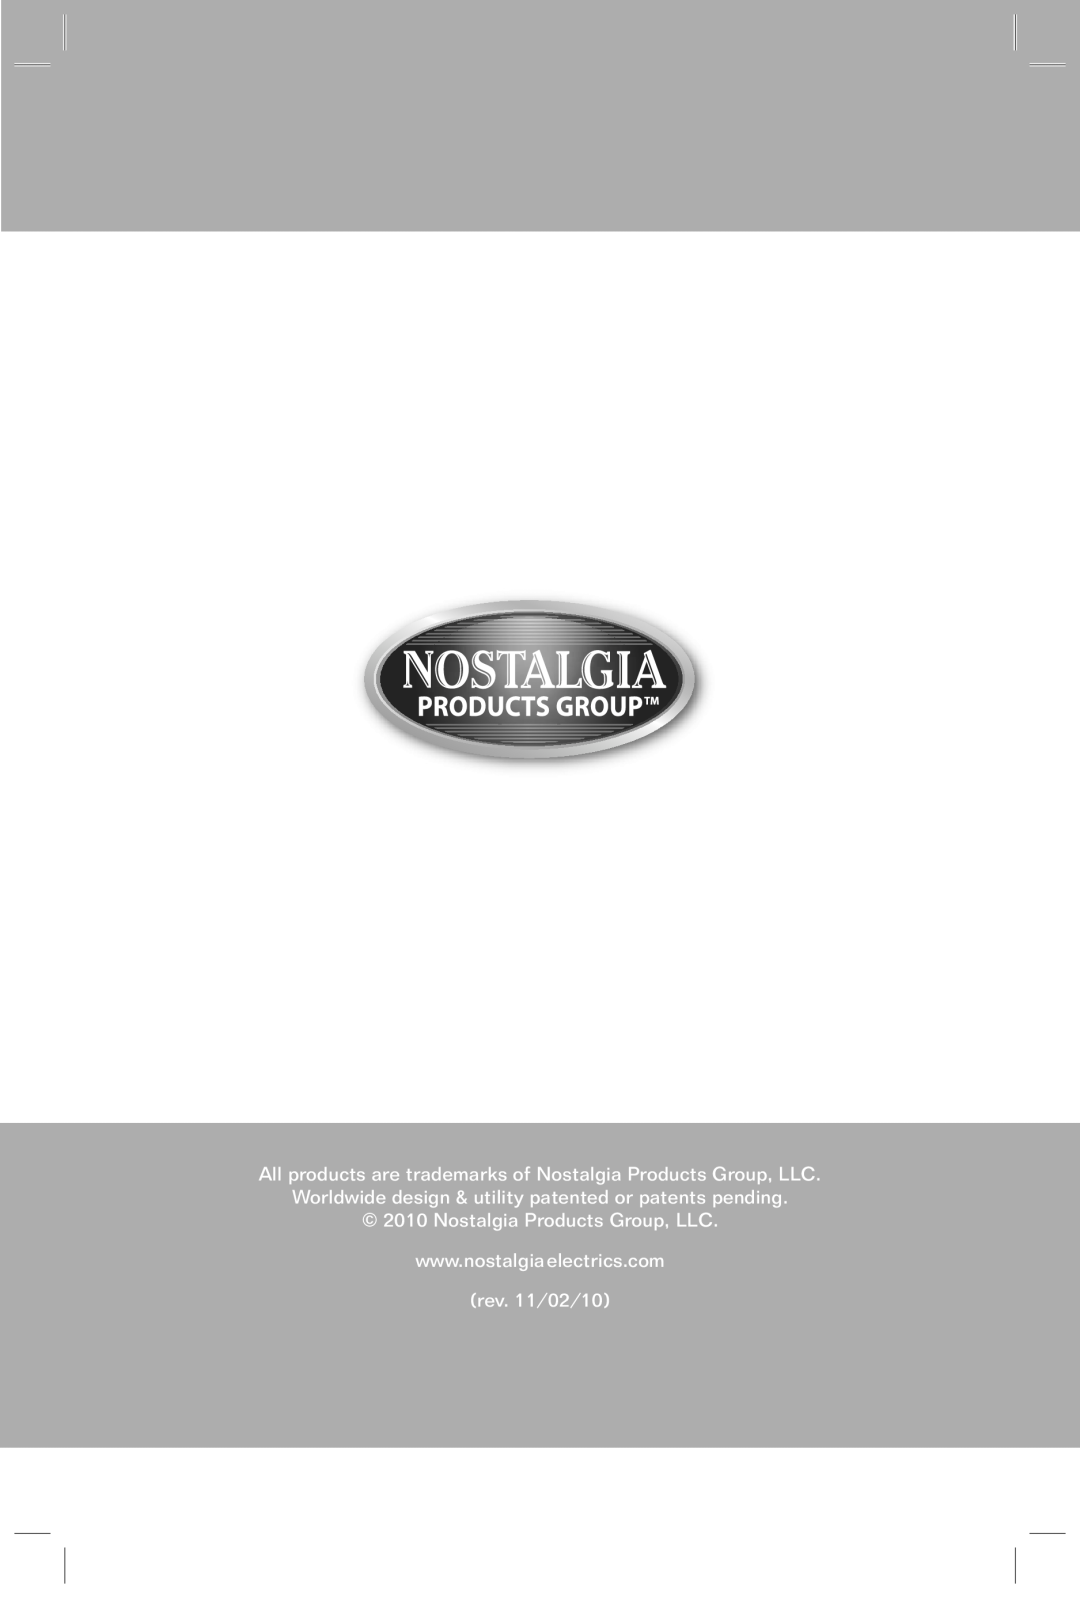 Nostalgia Electrics CCP610 manual All products are trademarks of Nostalgia Products Group, LLC, rev. 11/02/10 